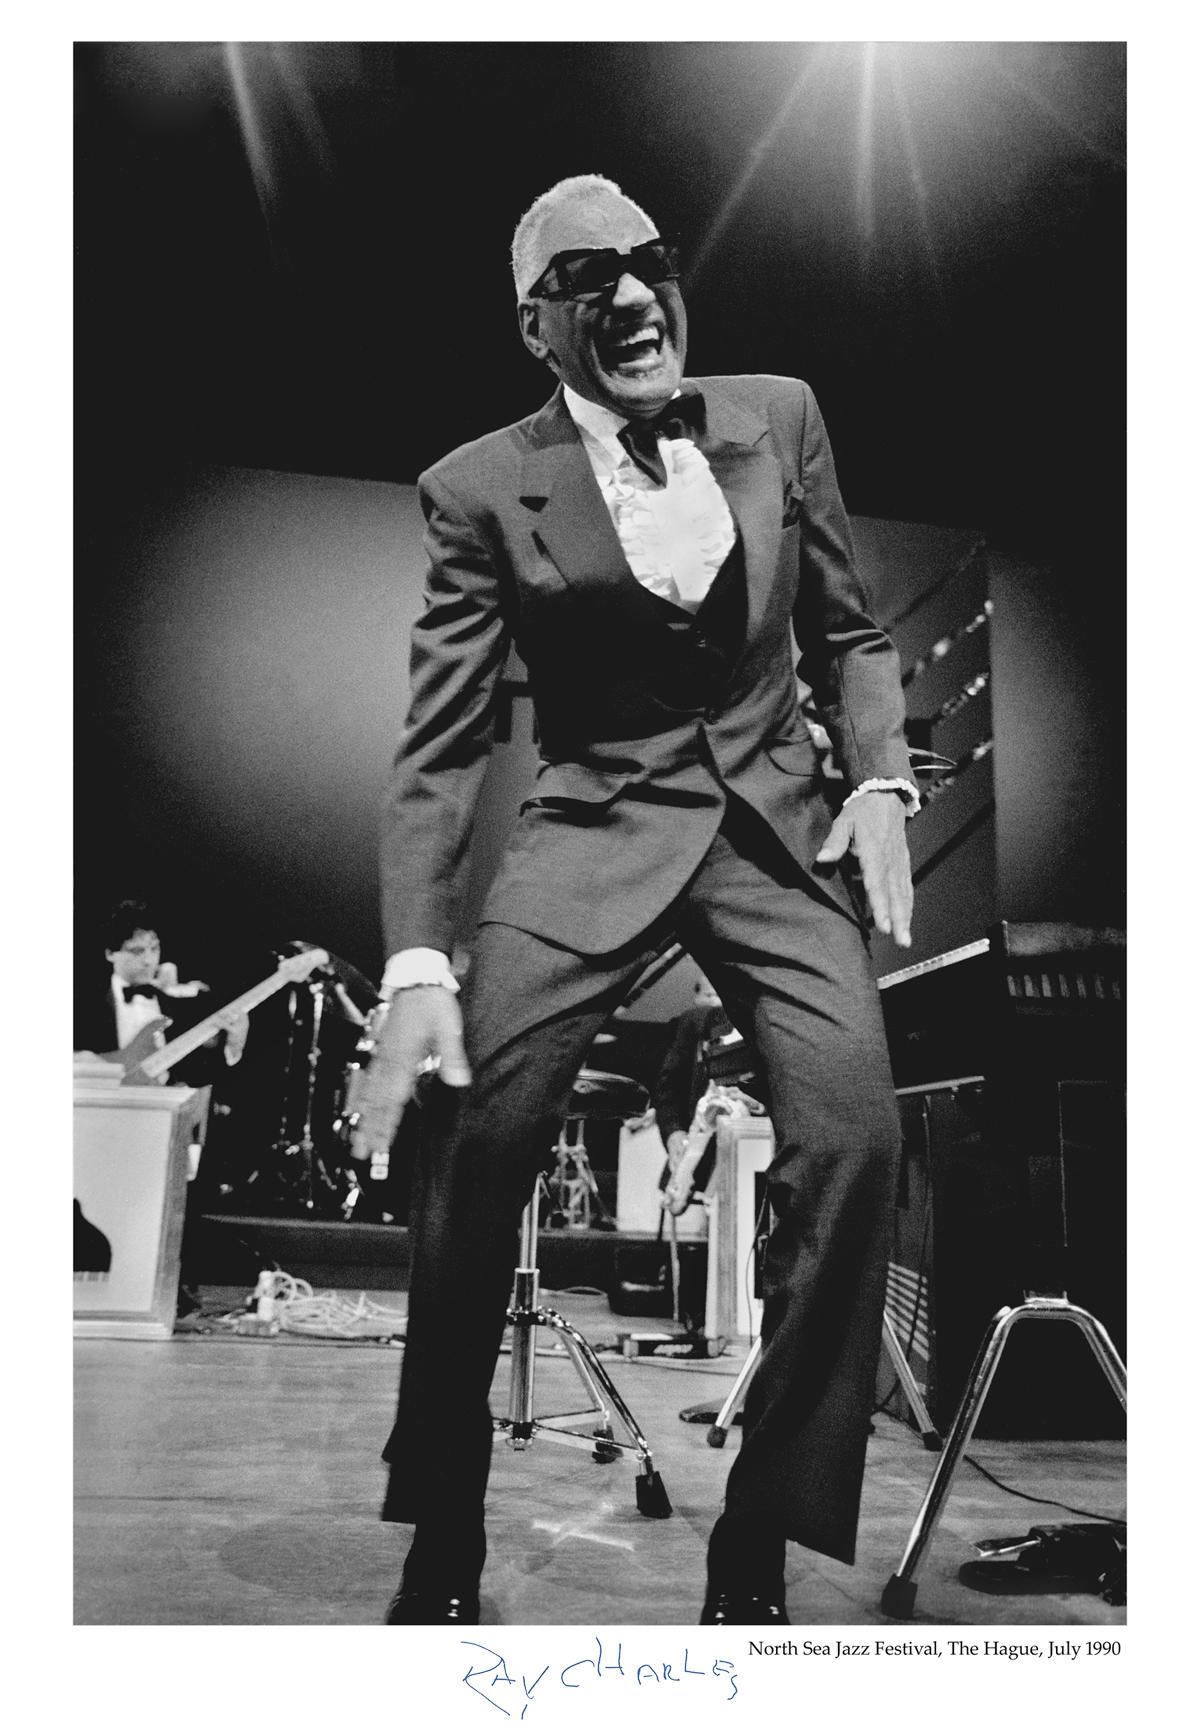 Ray Charles at The North Sea Jazz Festival, The Hague. Very large, high resolution, signed and numbered print, made from the original negative on archival quality, acid free paper. This process is supervised, numbered and signed by the artist, along